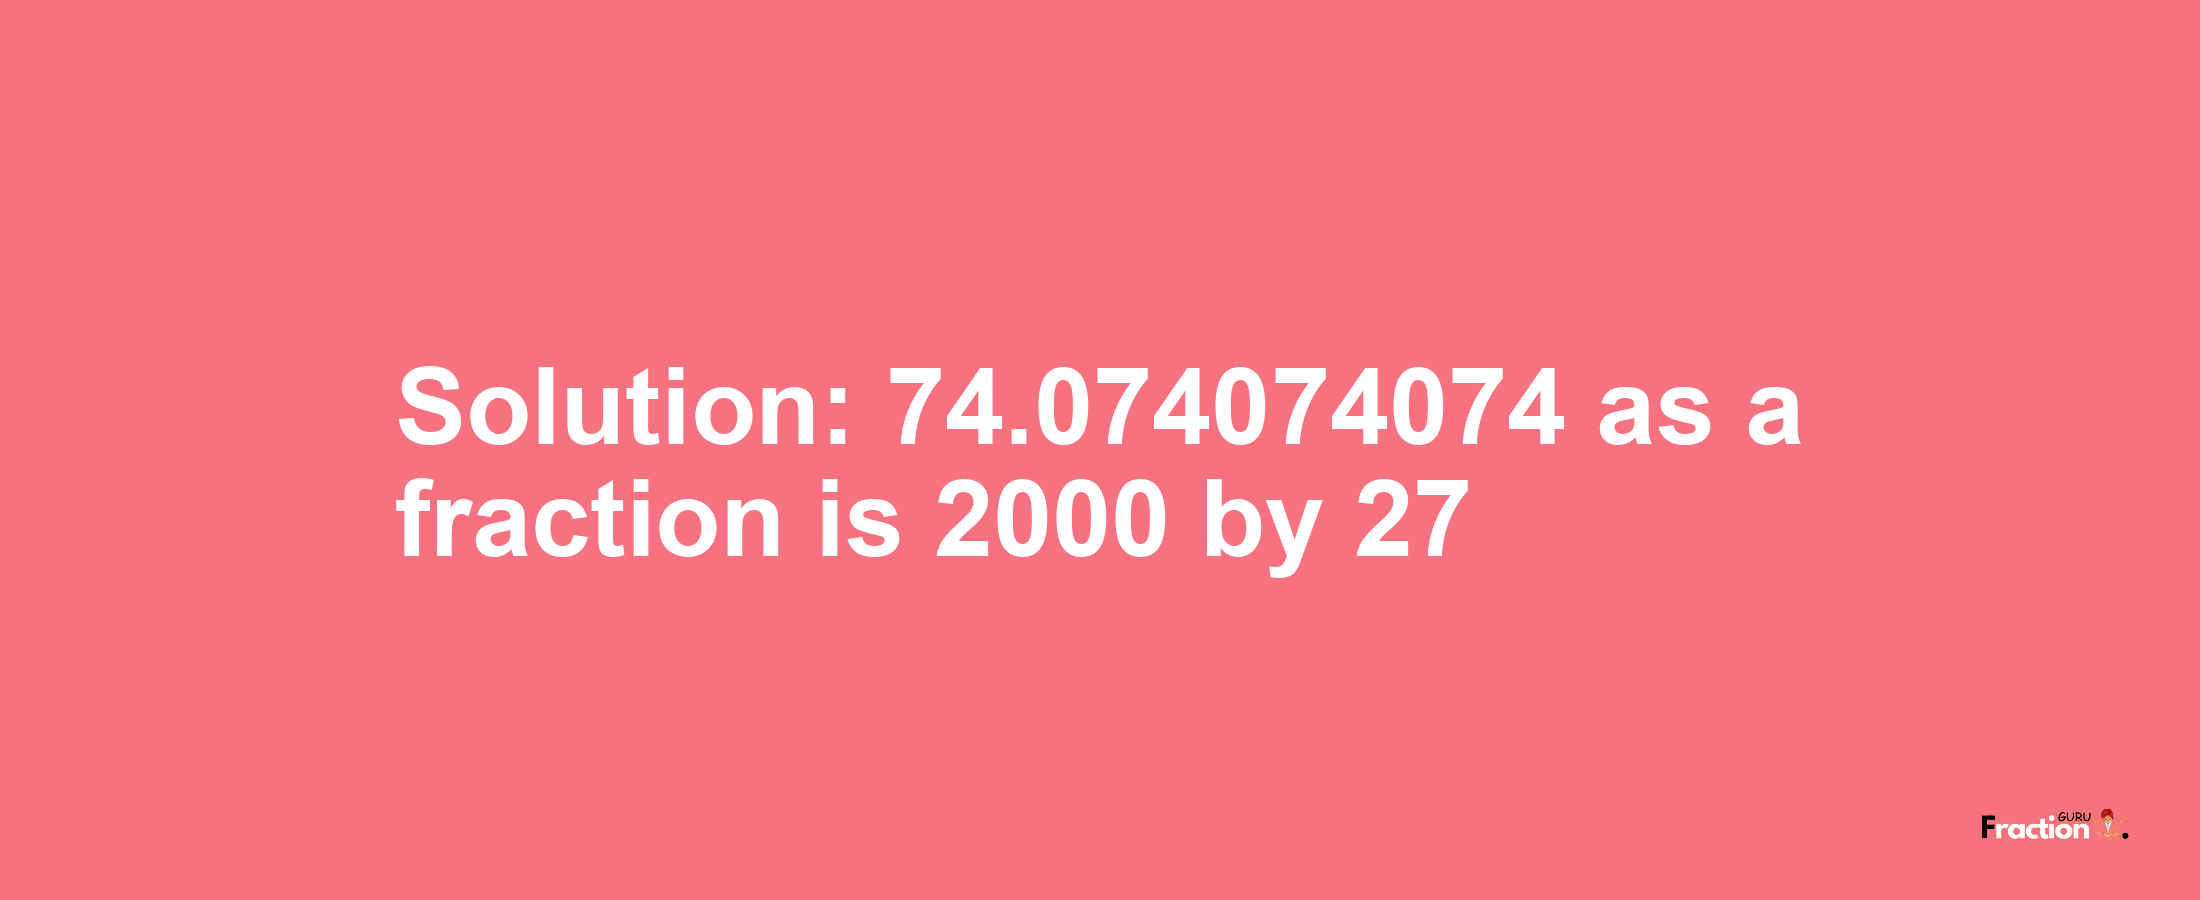 Solution:74.074074074 as a fraction is 2000/27